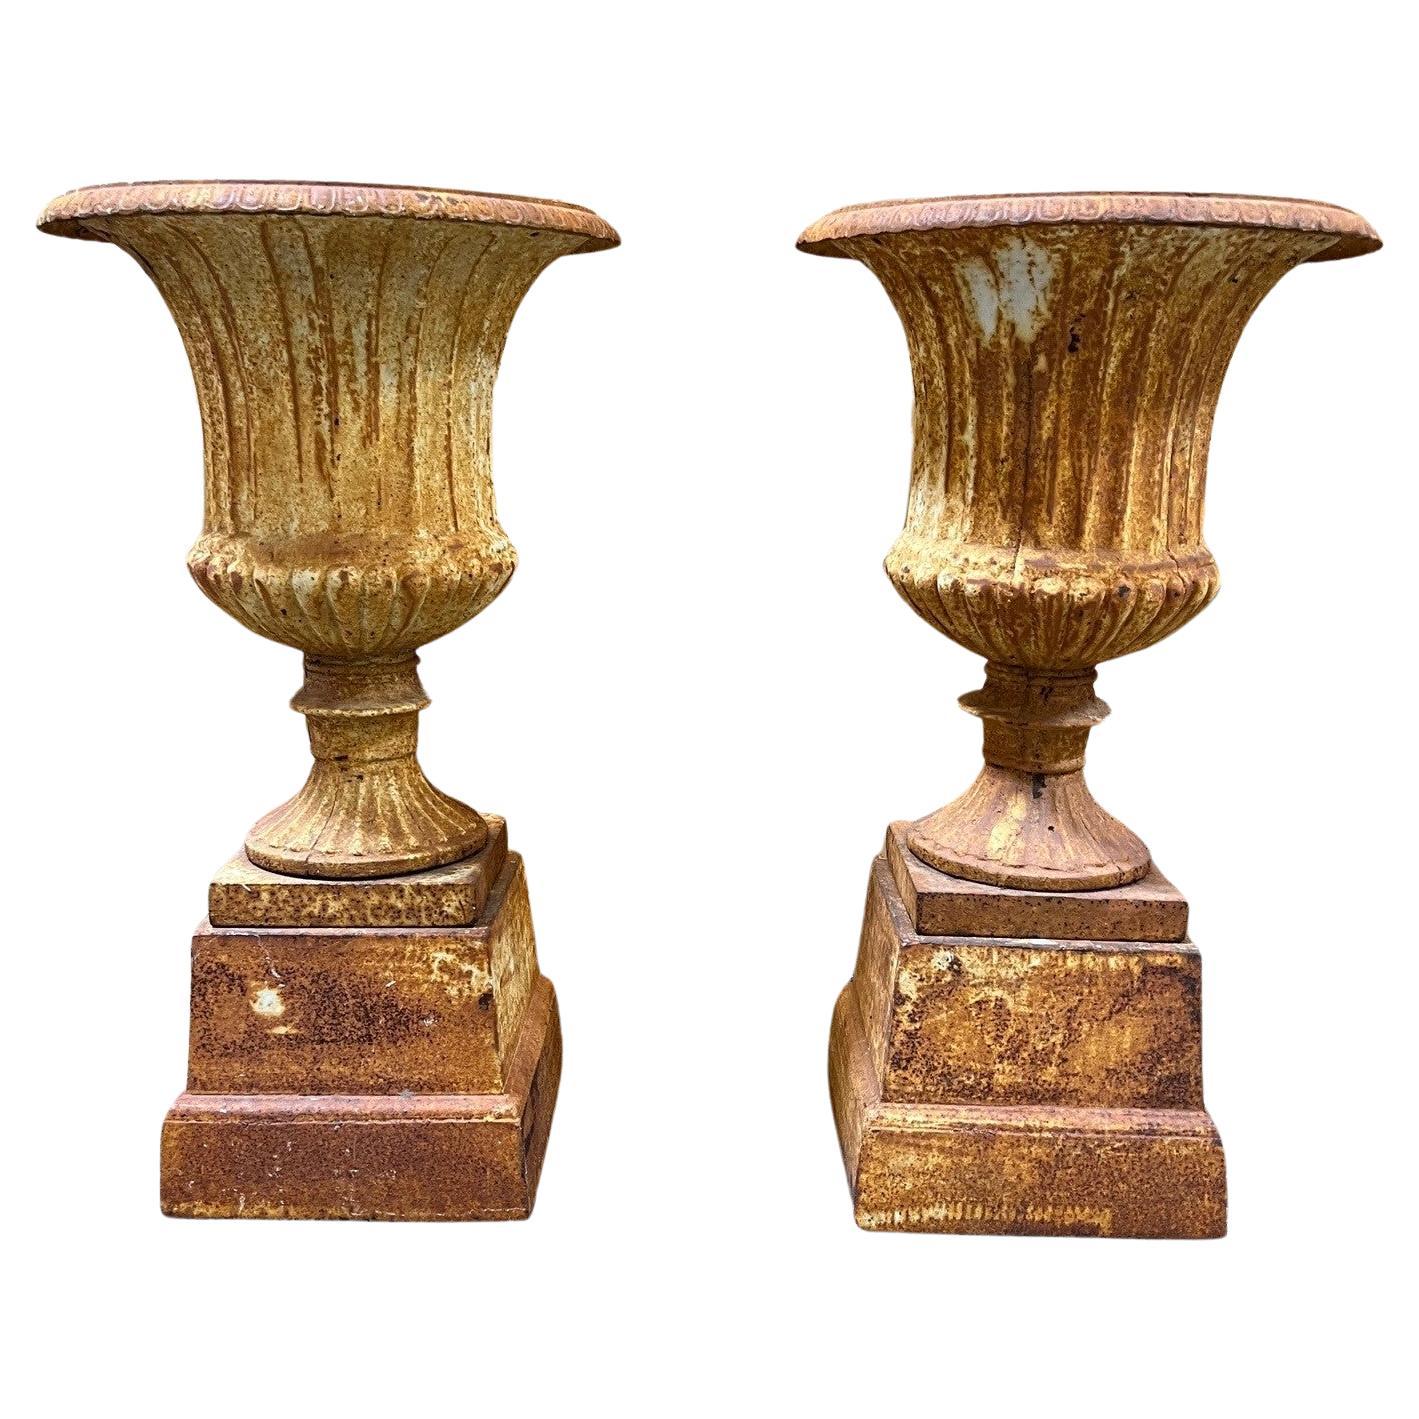 Vintage Pair of Fluted Cast Iron Urns on Square Bases